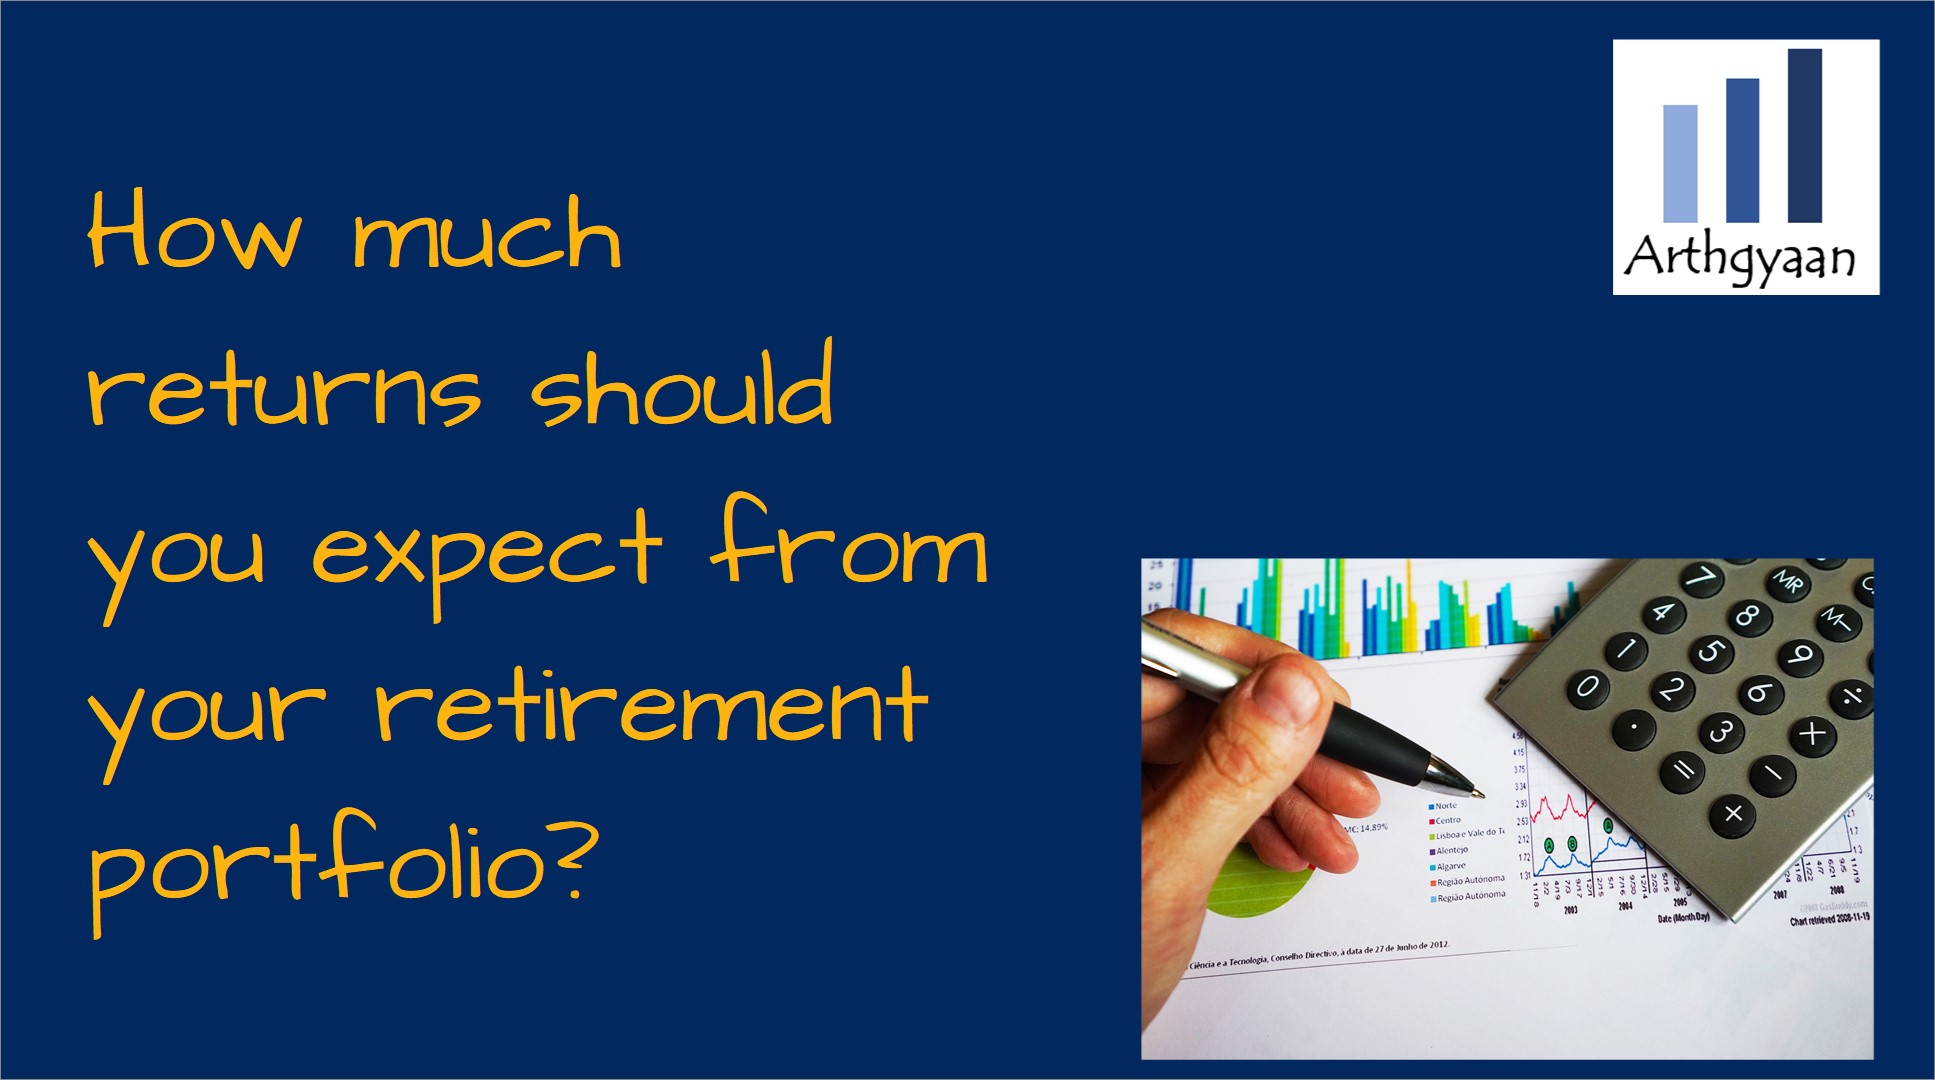 How much returns should you expect from your retirement portfolio?